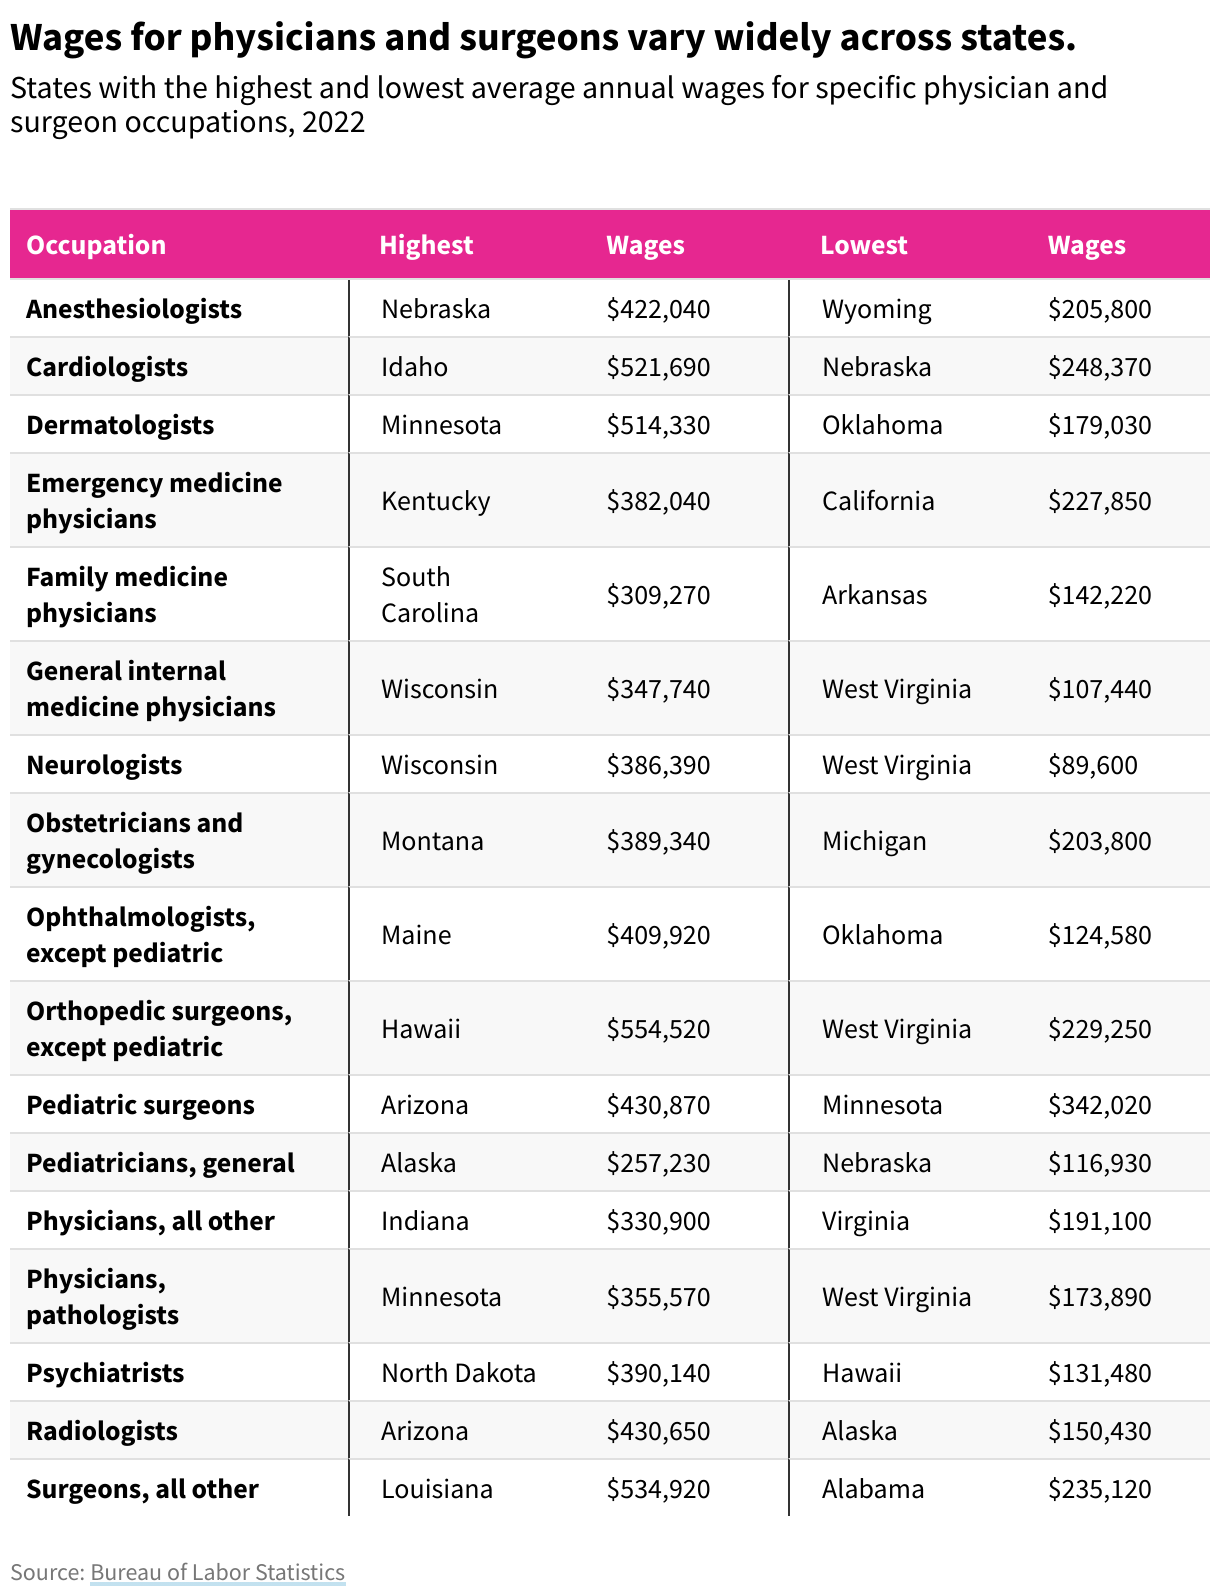 Table showing the states with the highest and lowest average annual wages for specific physician and surgeon occupations in 2022